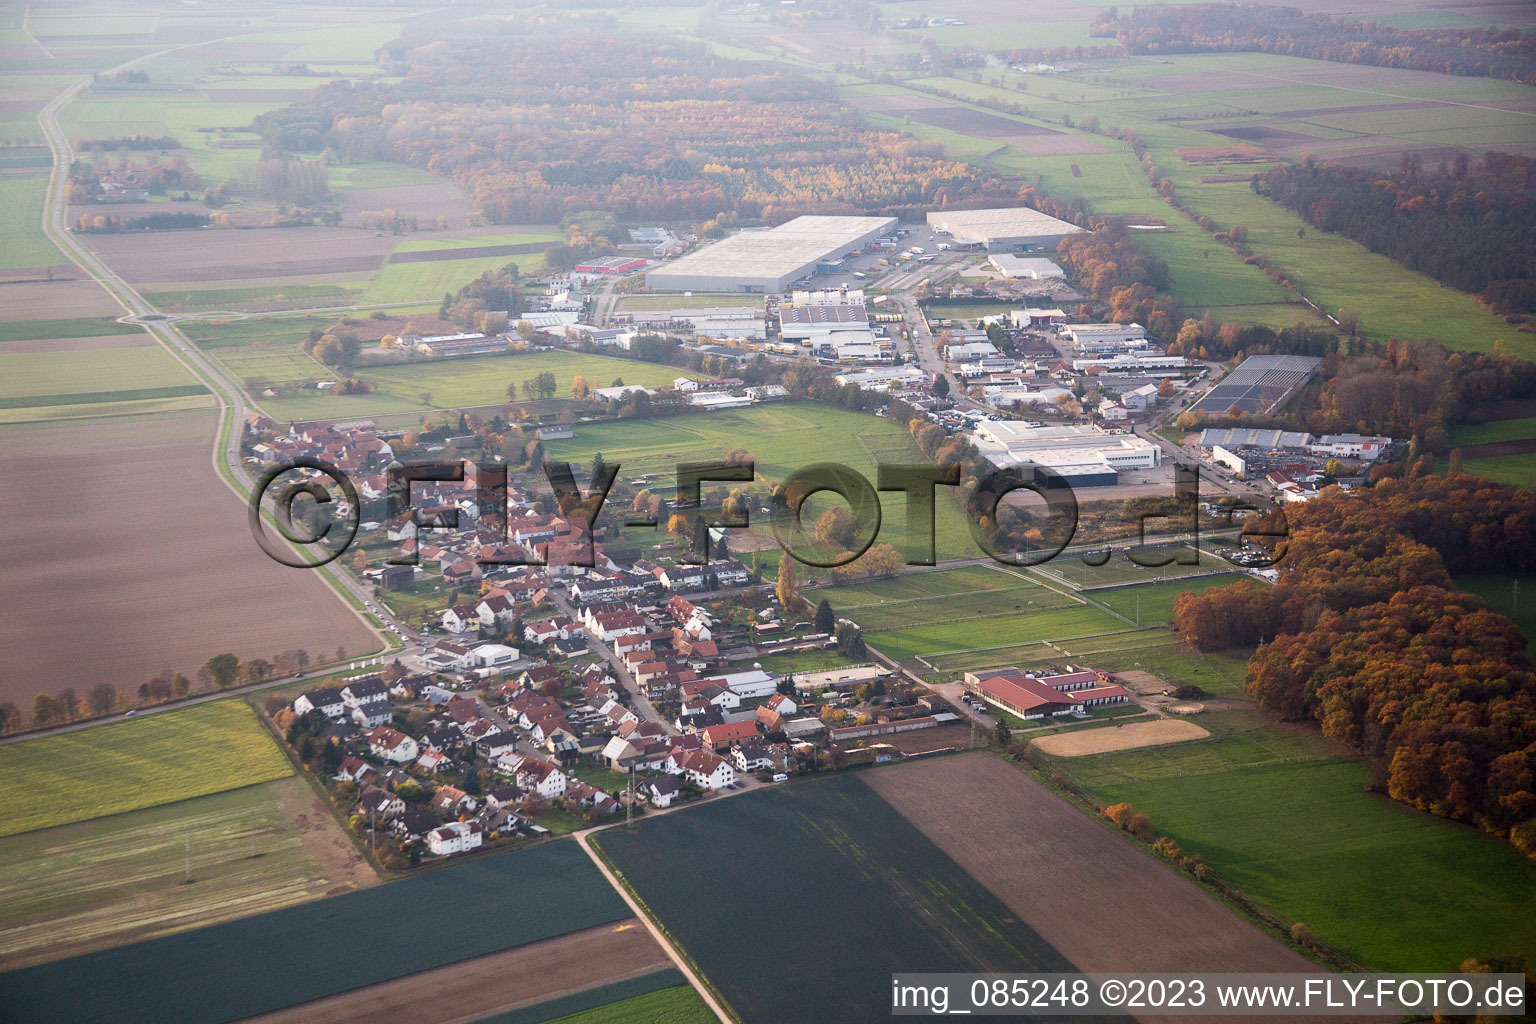 Aerial view of District Minderslachen in Kandel in the state Rhineland-Palatinate, Germany